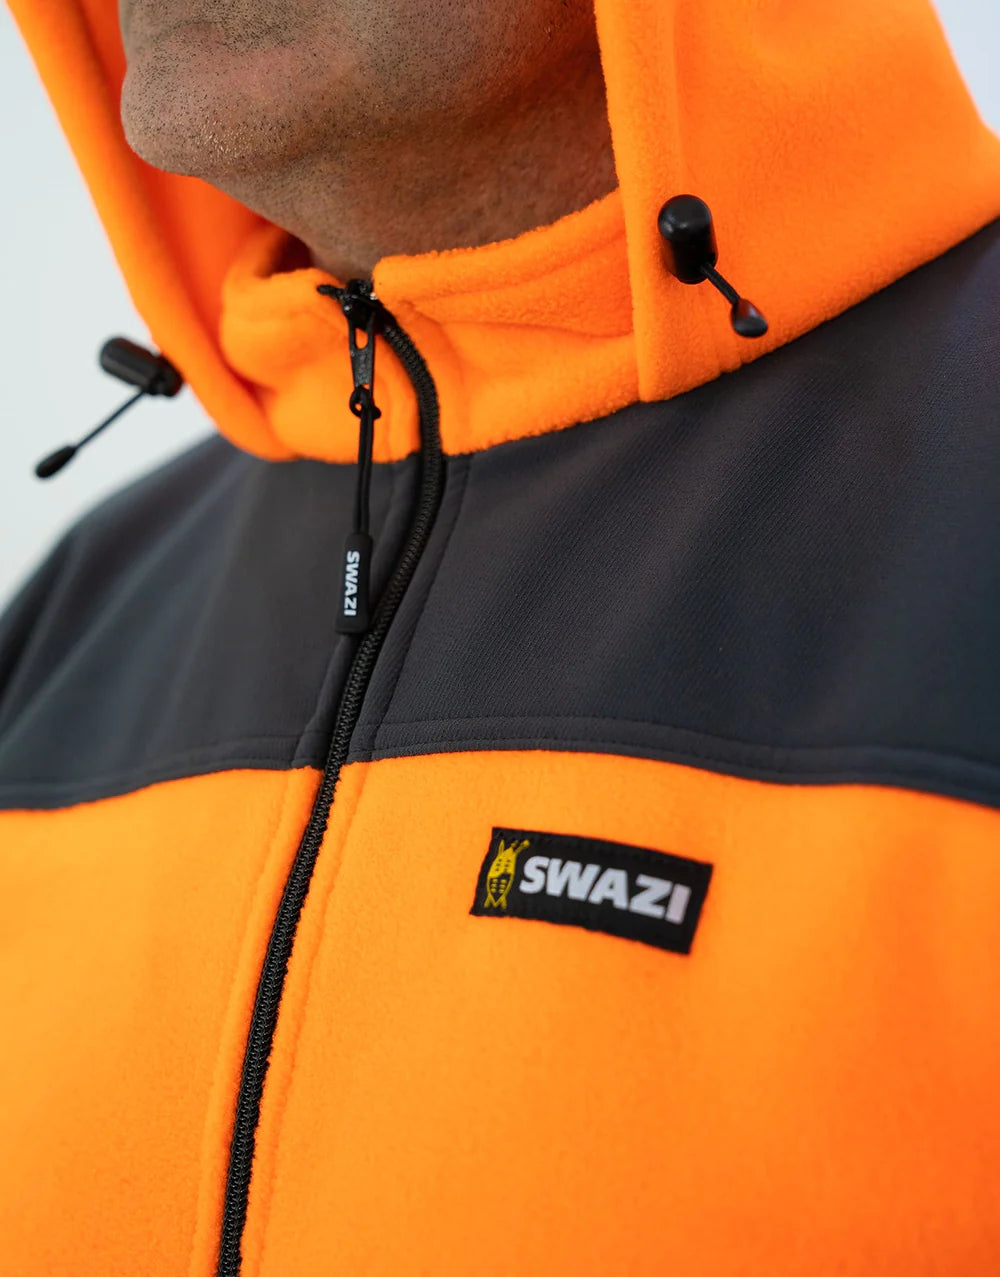 Swazi Hi-Vis The Fed -  - Mansfield Hunting & Fishing - Products to prepare for Corona Virus